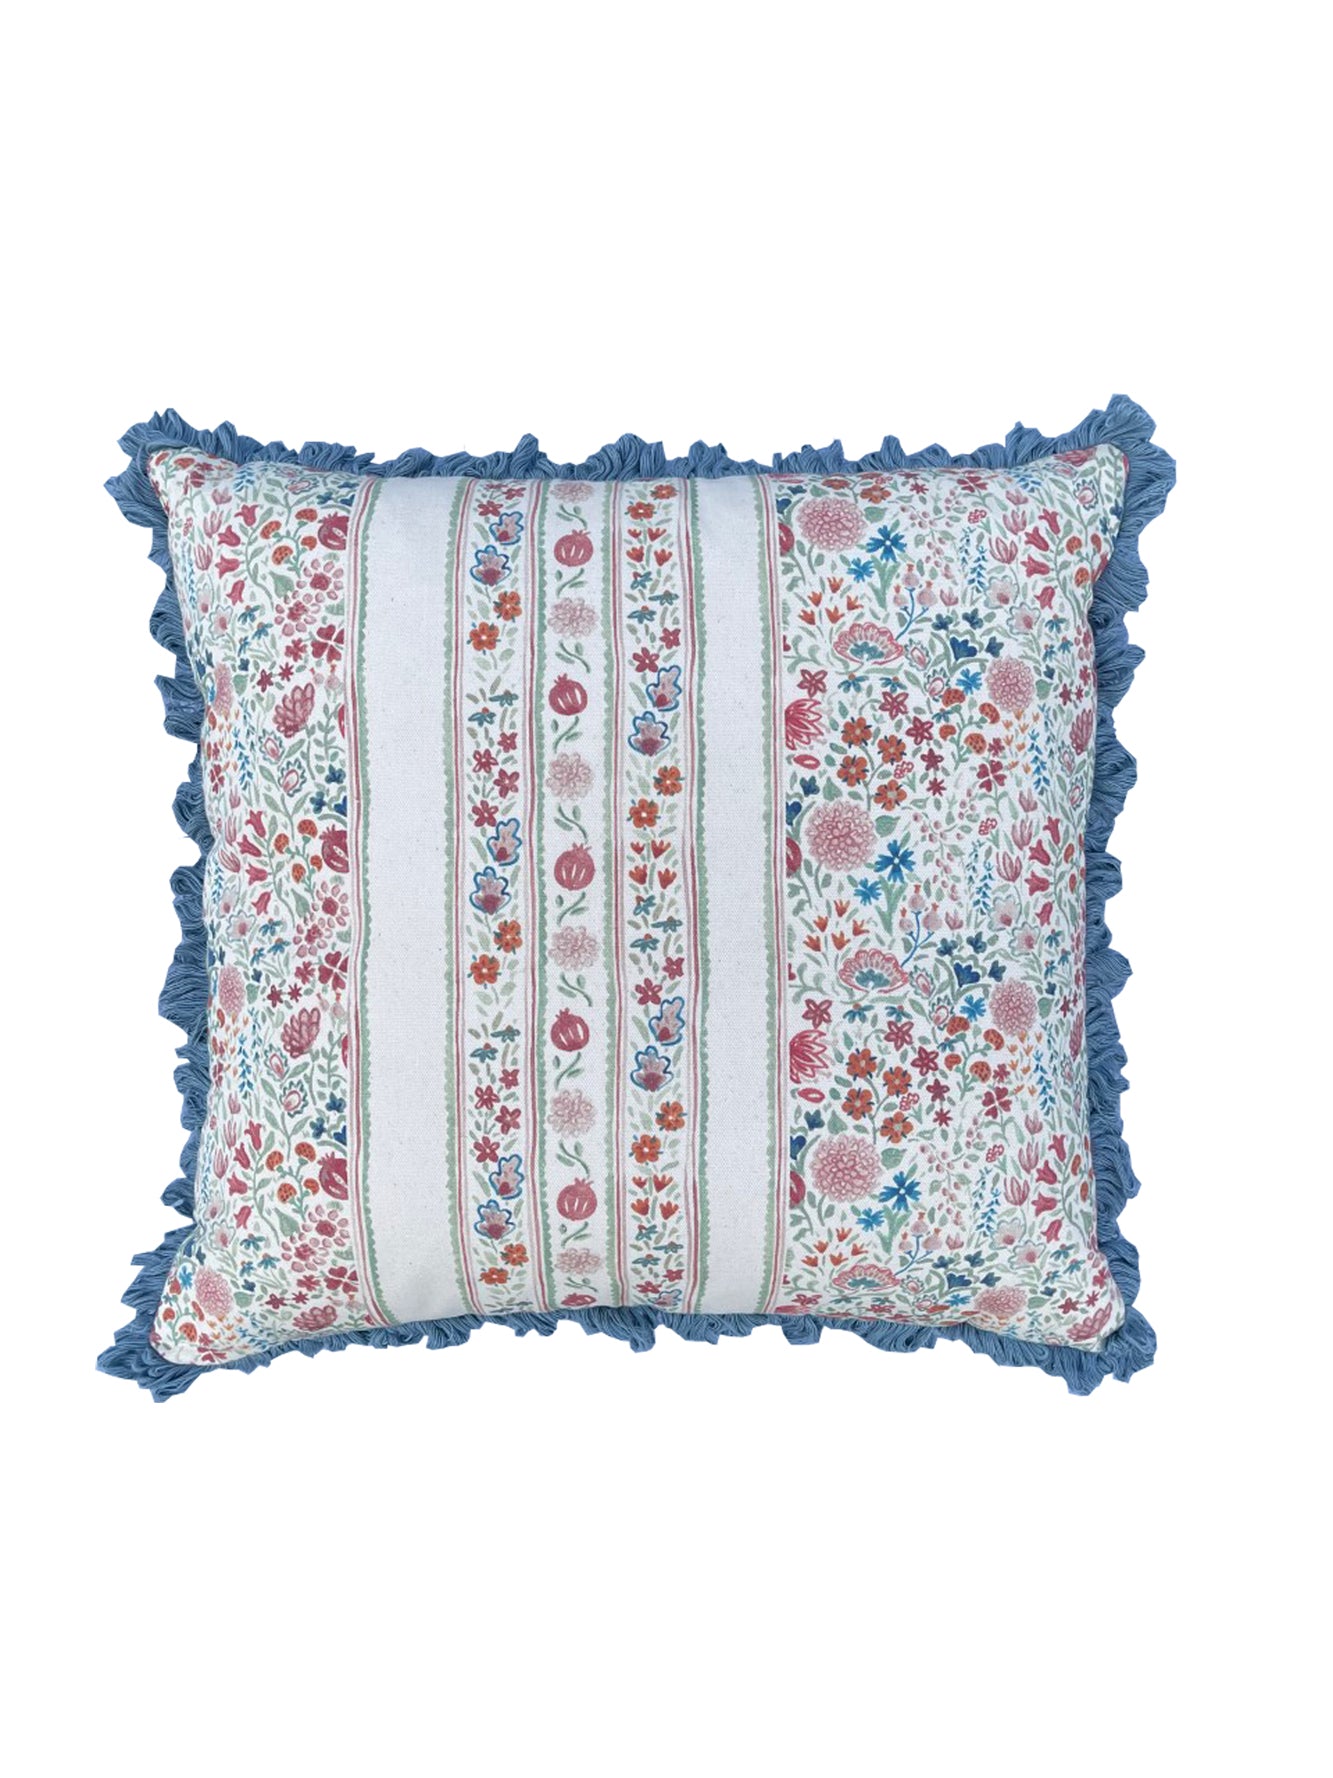 PARDIS FABRIC CUSHION IN MOGHUL MEADOW WASHED